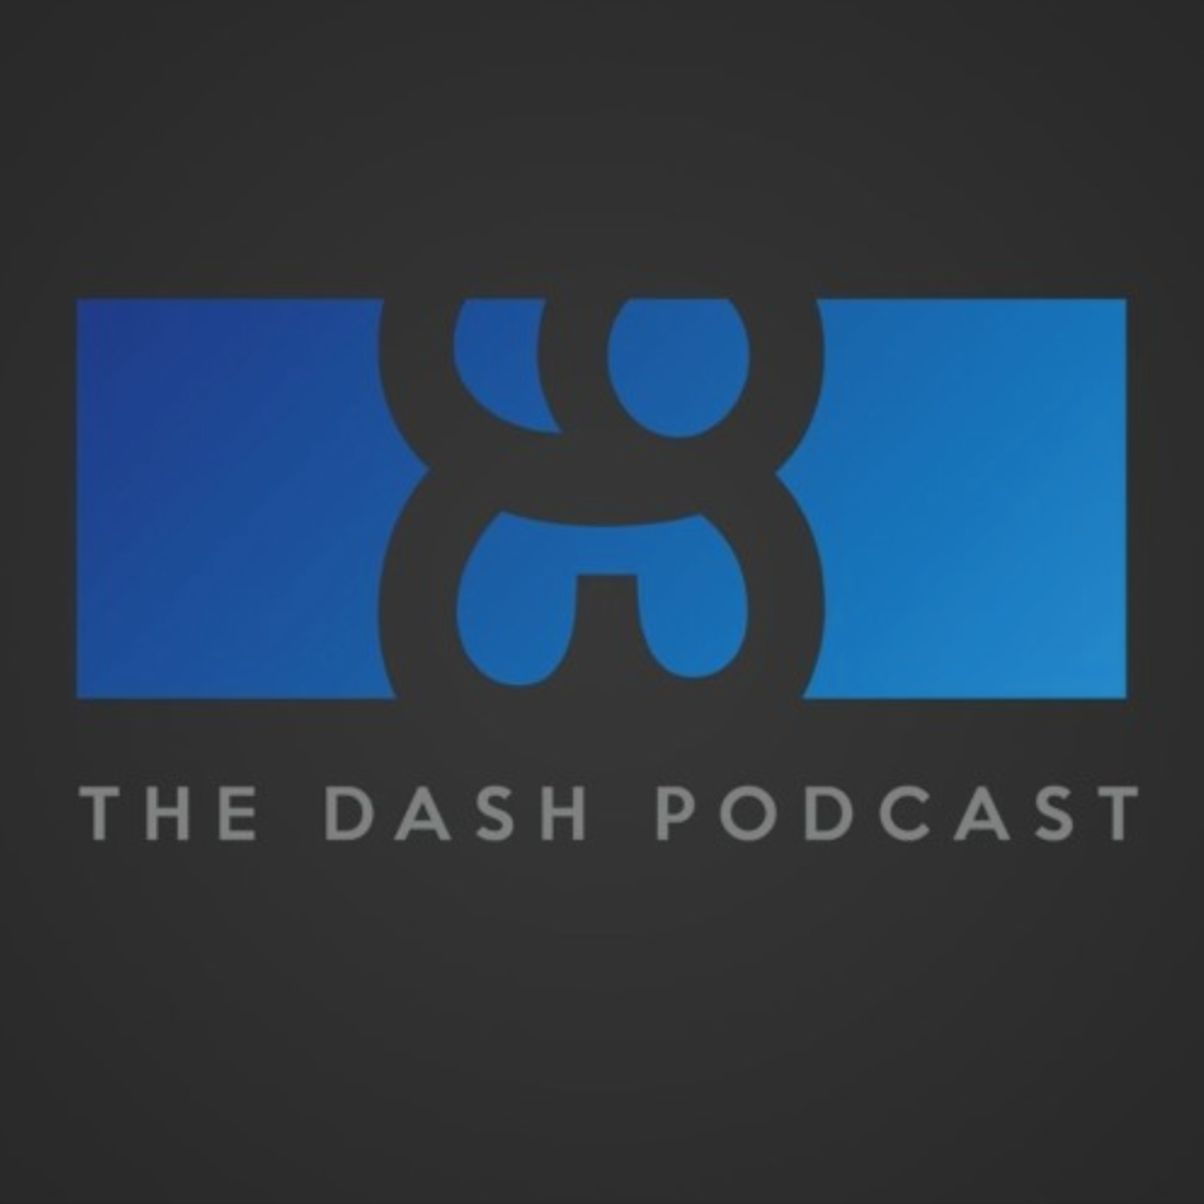 The Dash podcast show image